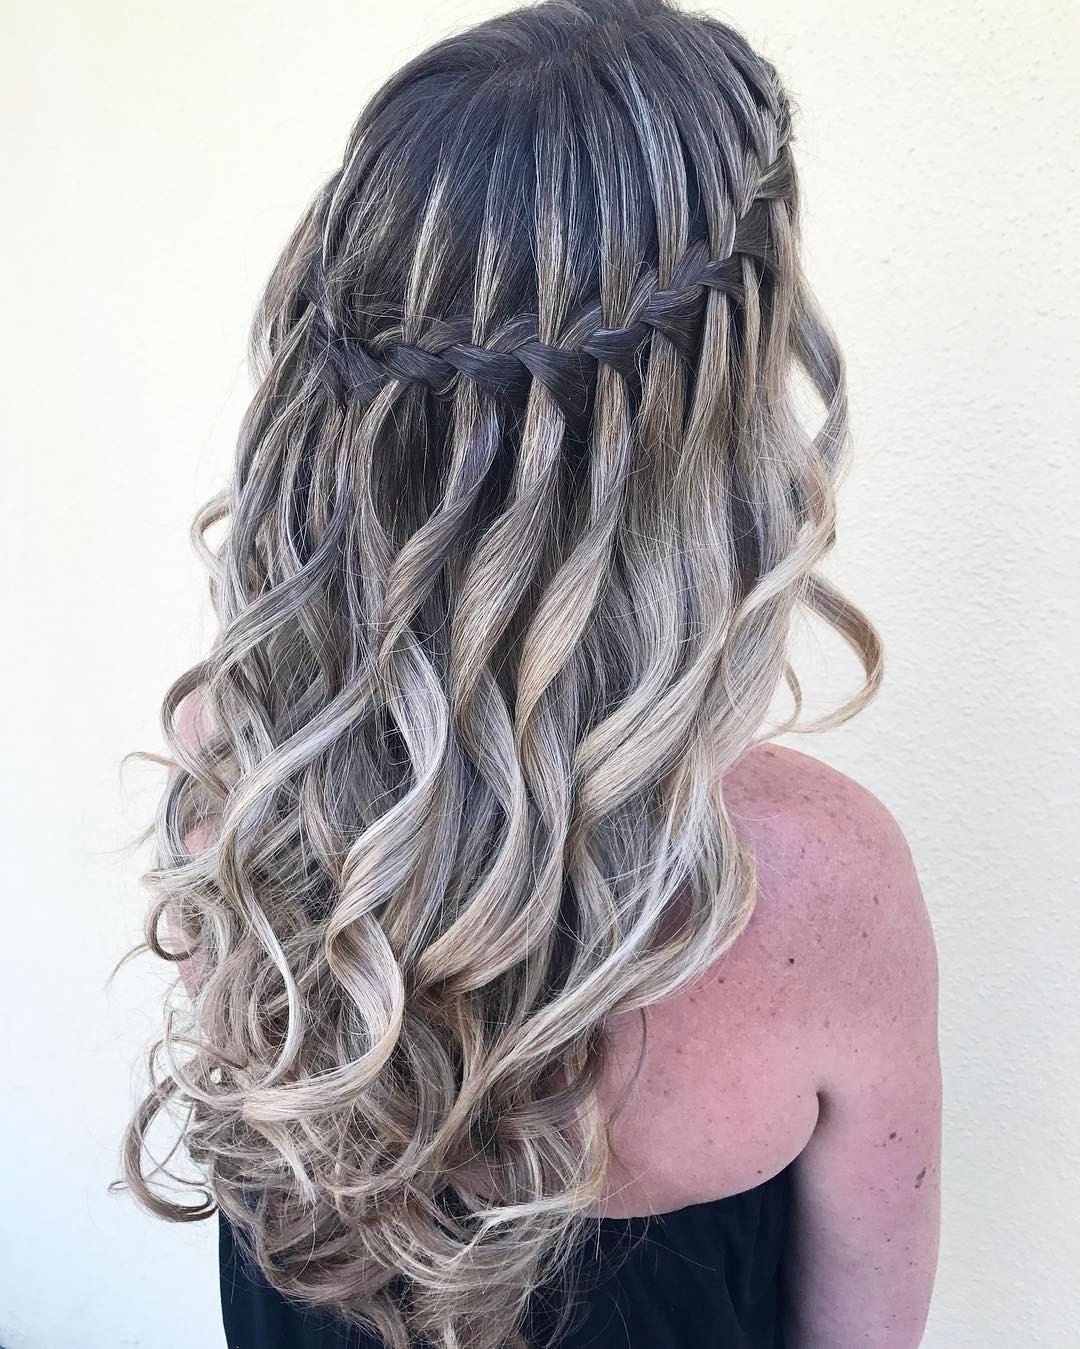 Curly Hairstyle With Waterfall Braid